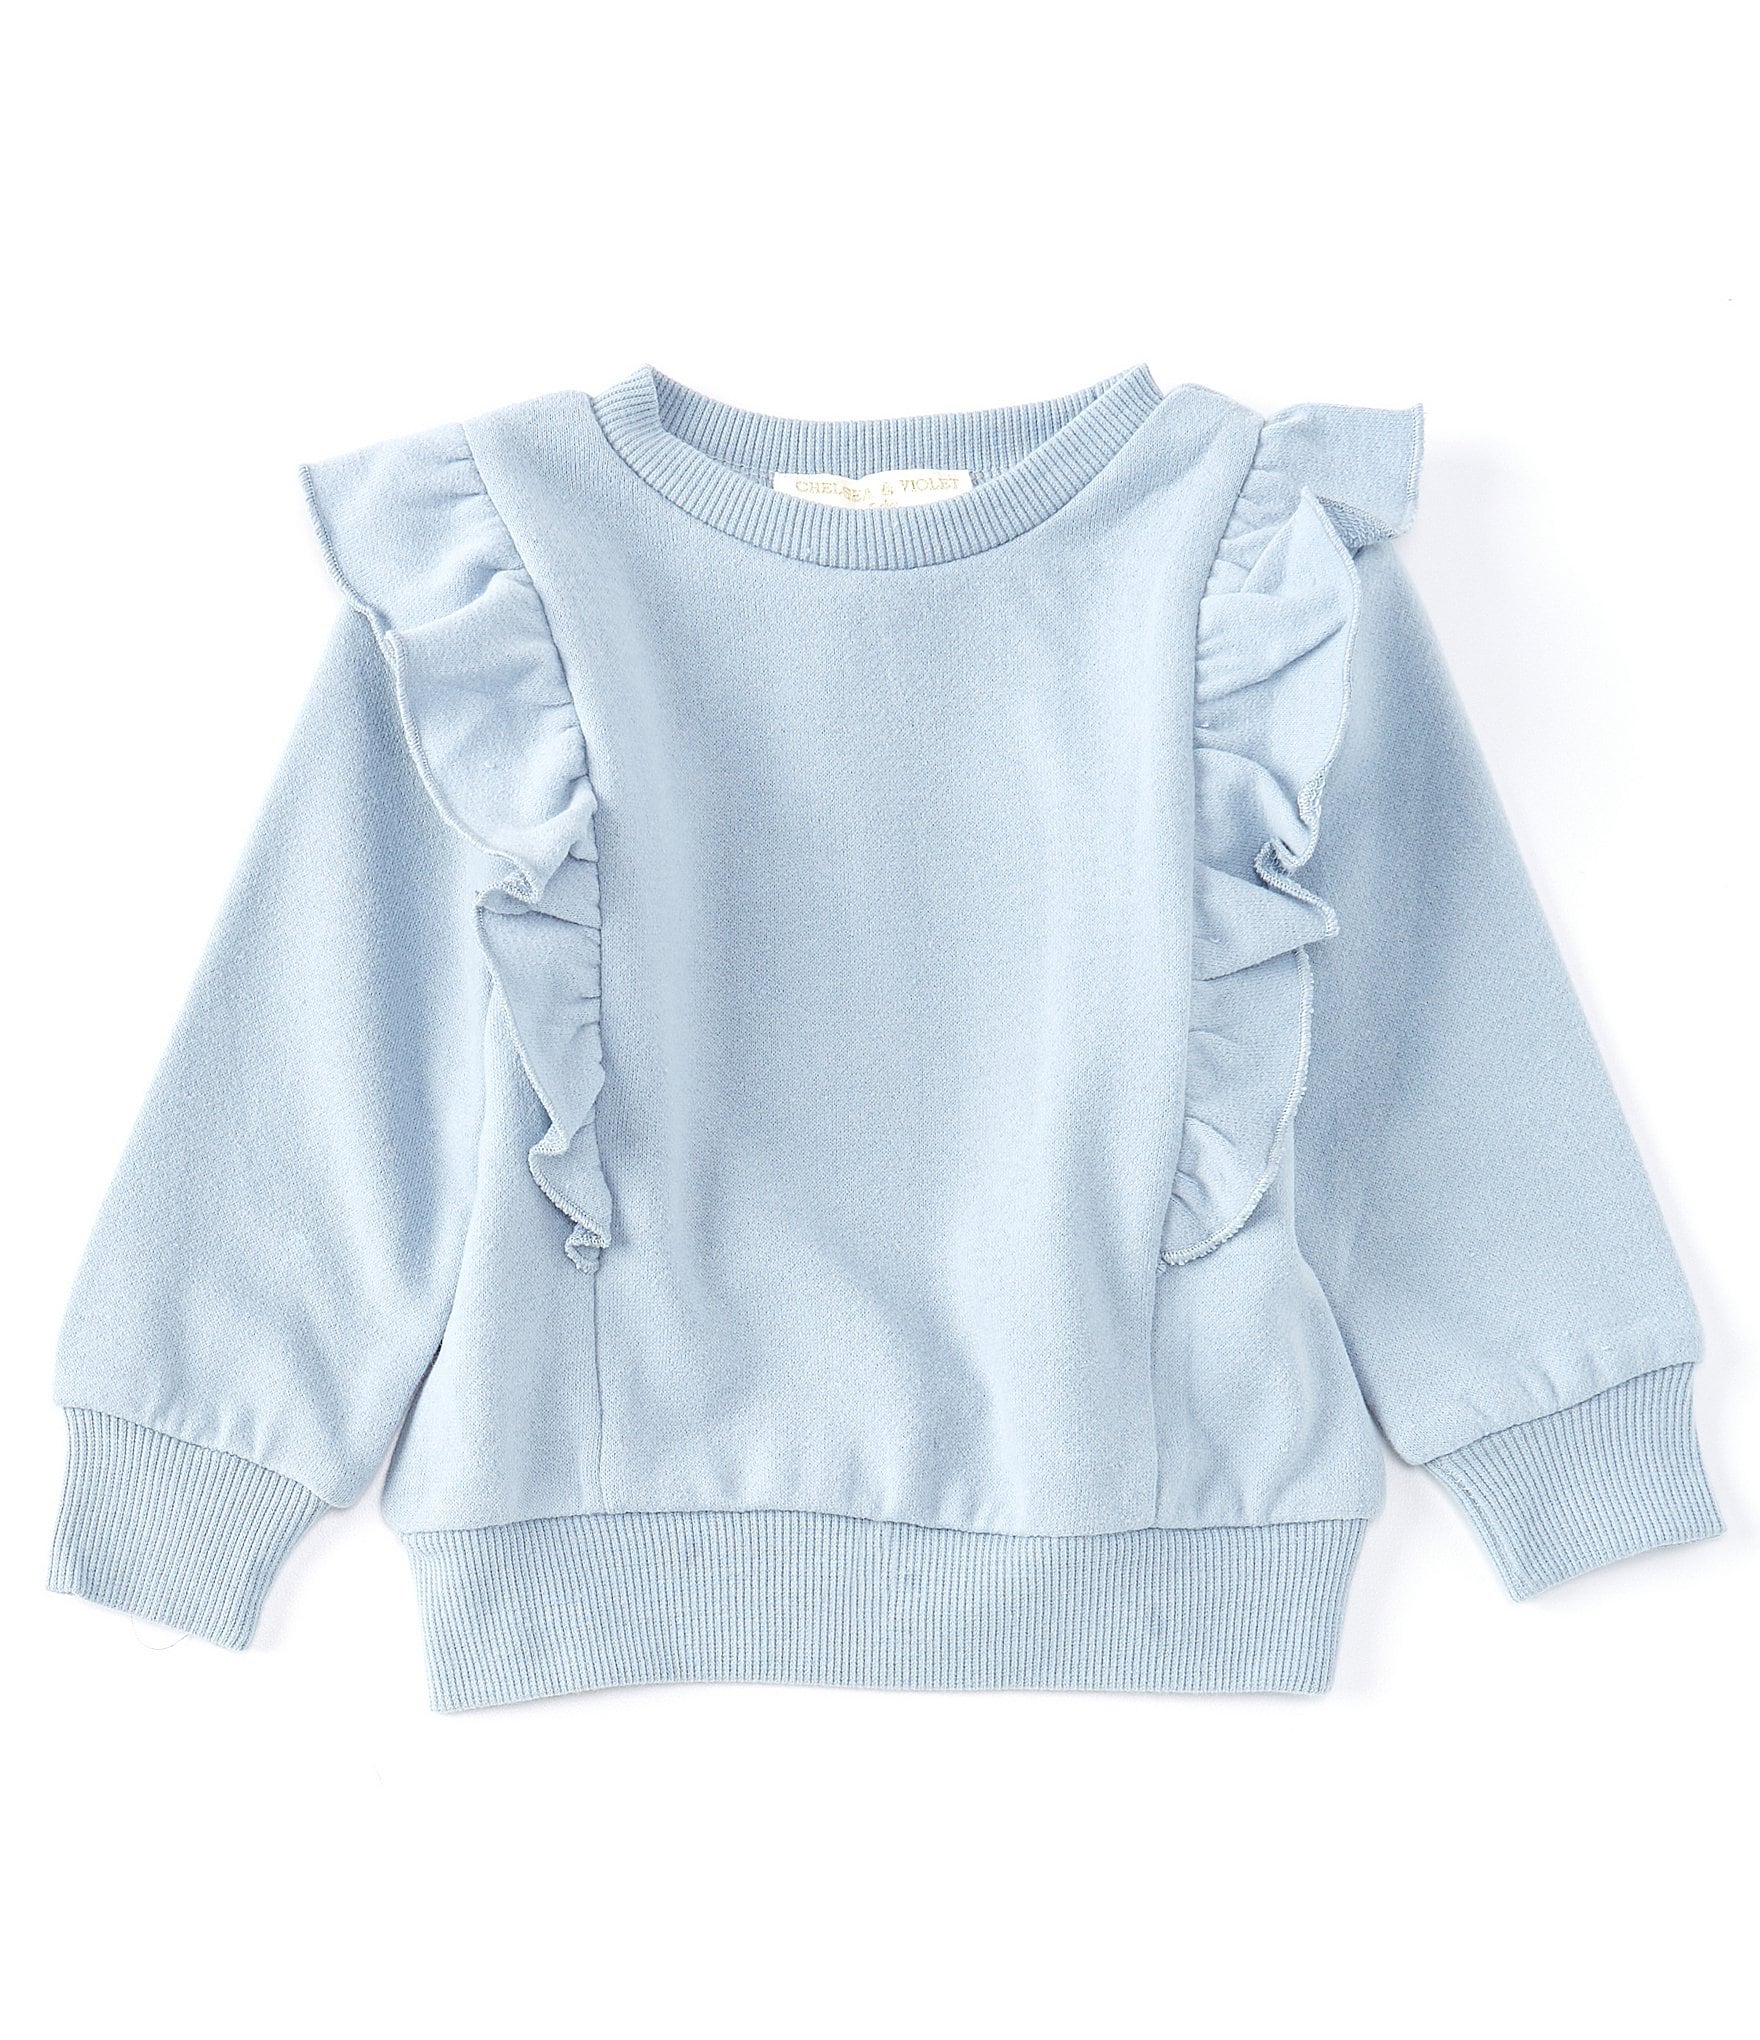 Chelsea & Violet Baby Girls 12-24 Months Ruffle French Terry Sweatshirt ...